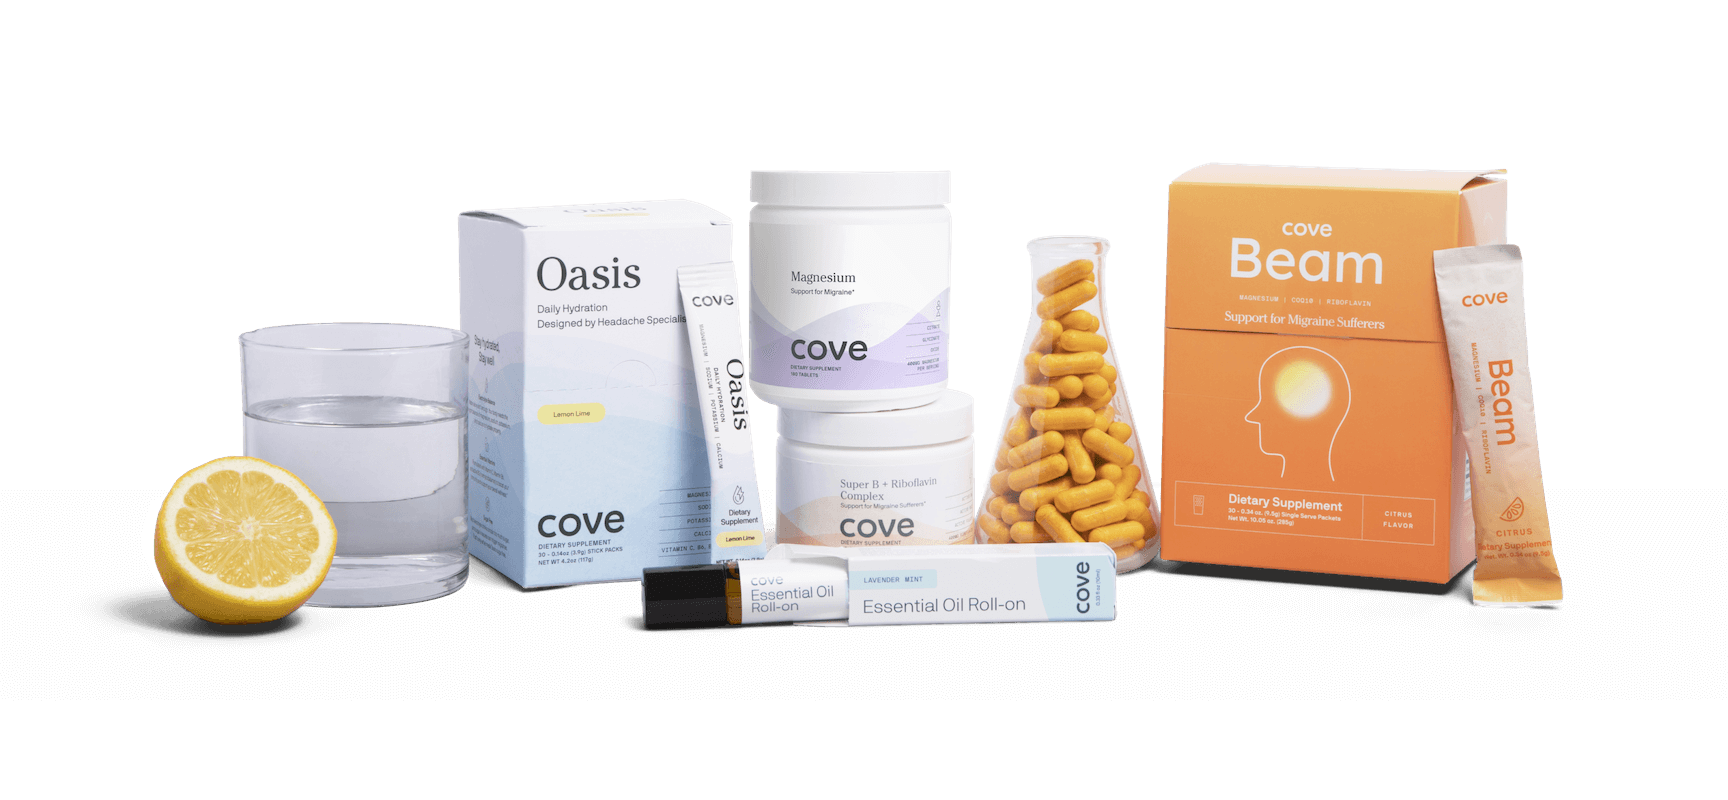 An image of Cove's wellness portfolio, showcasing a variety of supplements and vitamins designed to help you manage your migraine.